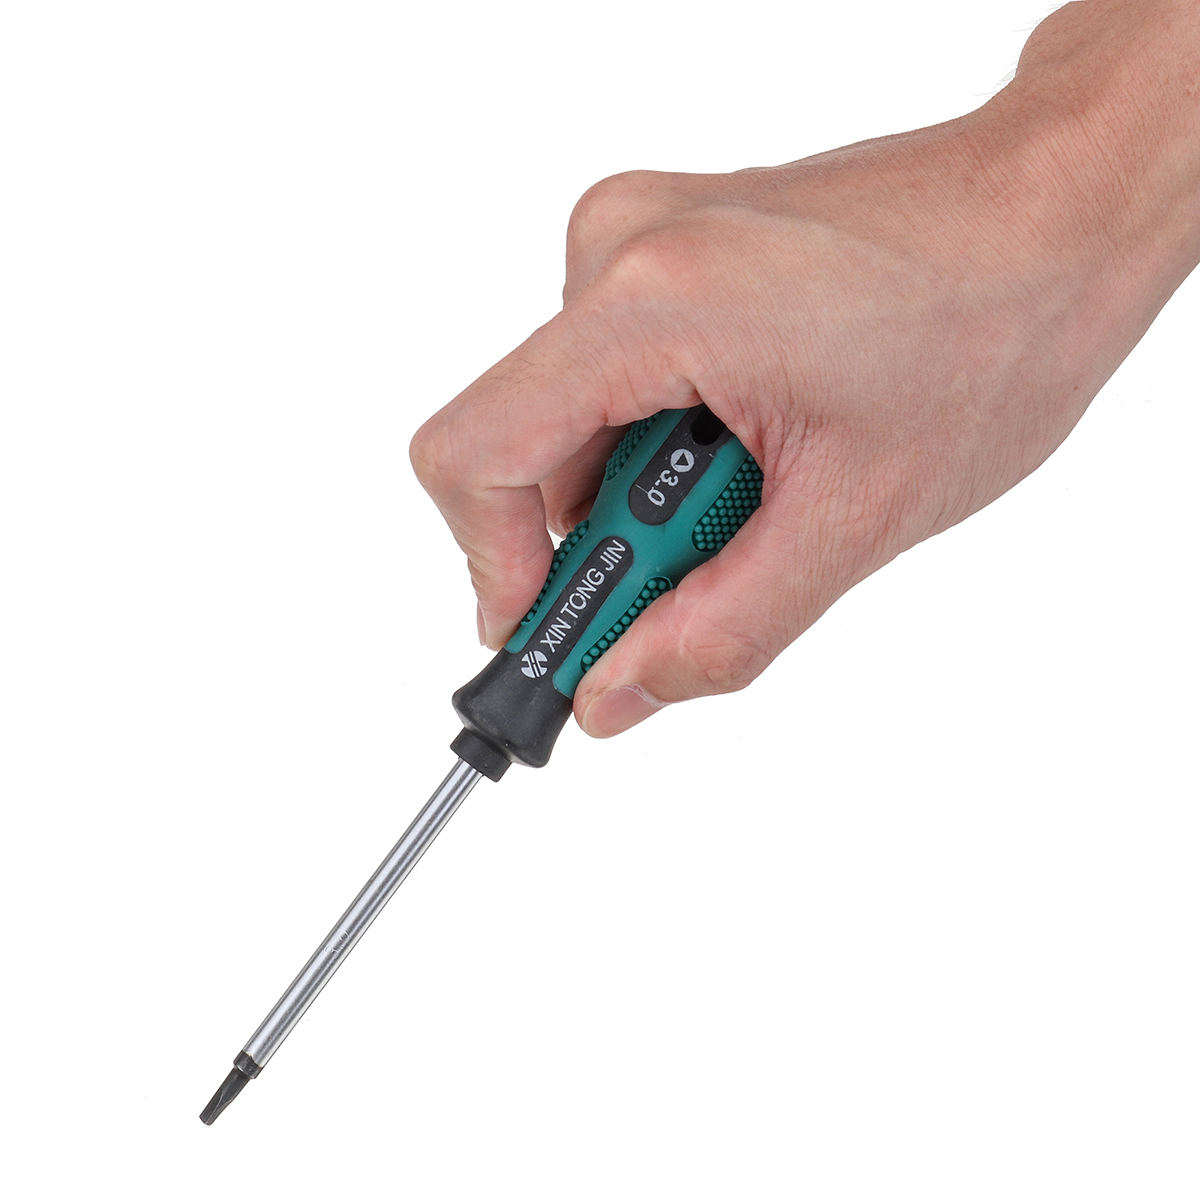 Portable-Insulated-Screwdriver-Magnetic-Bits-Watches-Toys-Repair-Tool-1553444-3